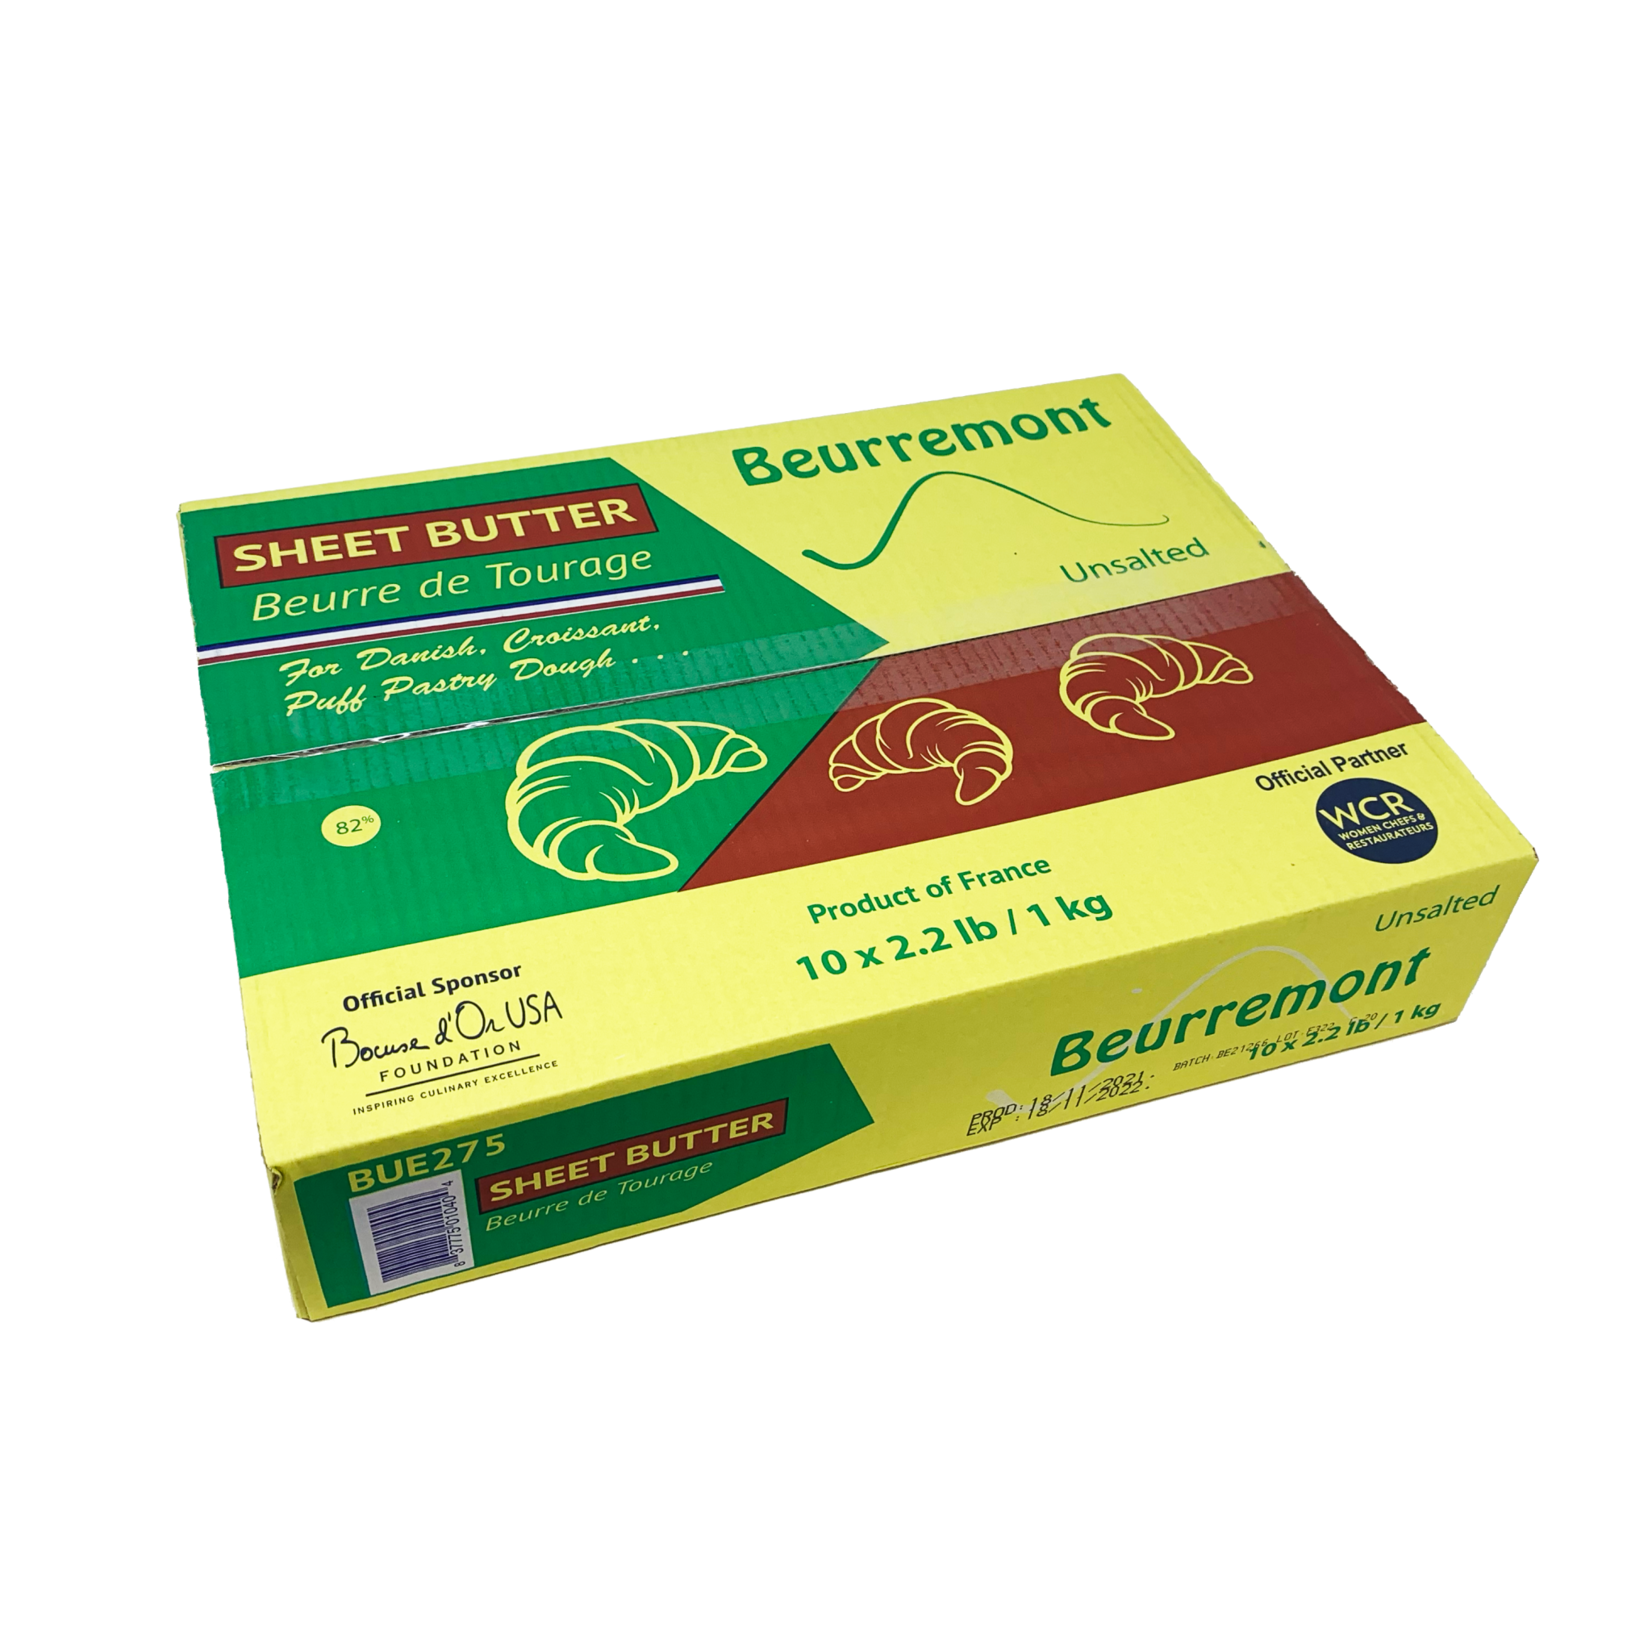 Beurremont Beurremont - 82% Tourage Butter in Sheets - 2.2 lb (box of 10)